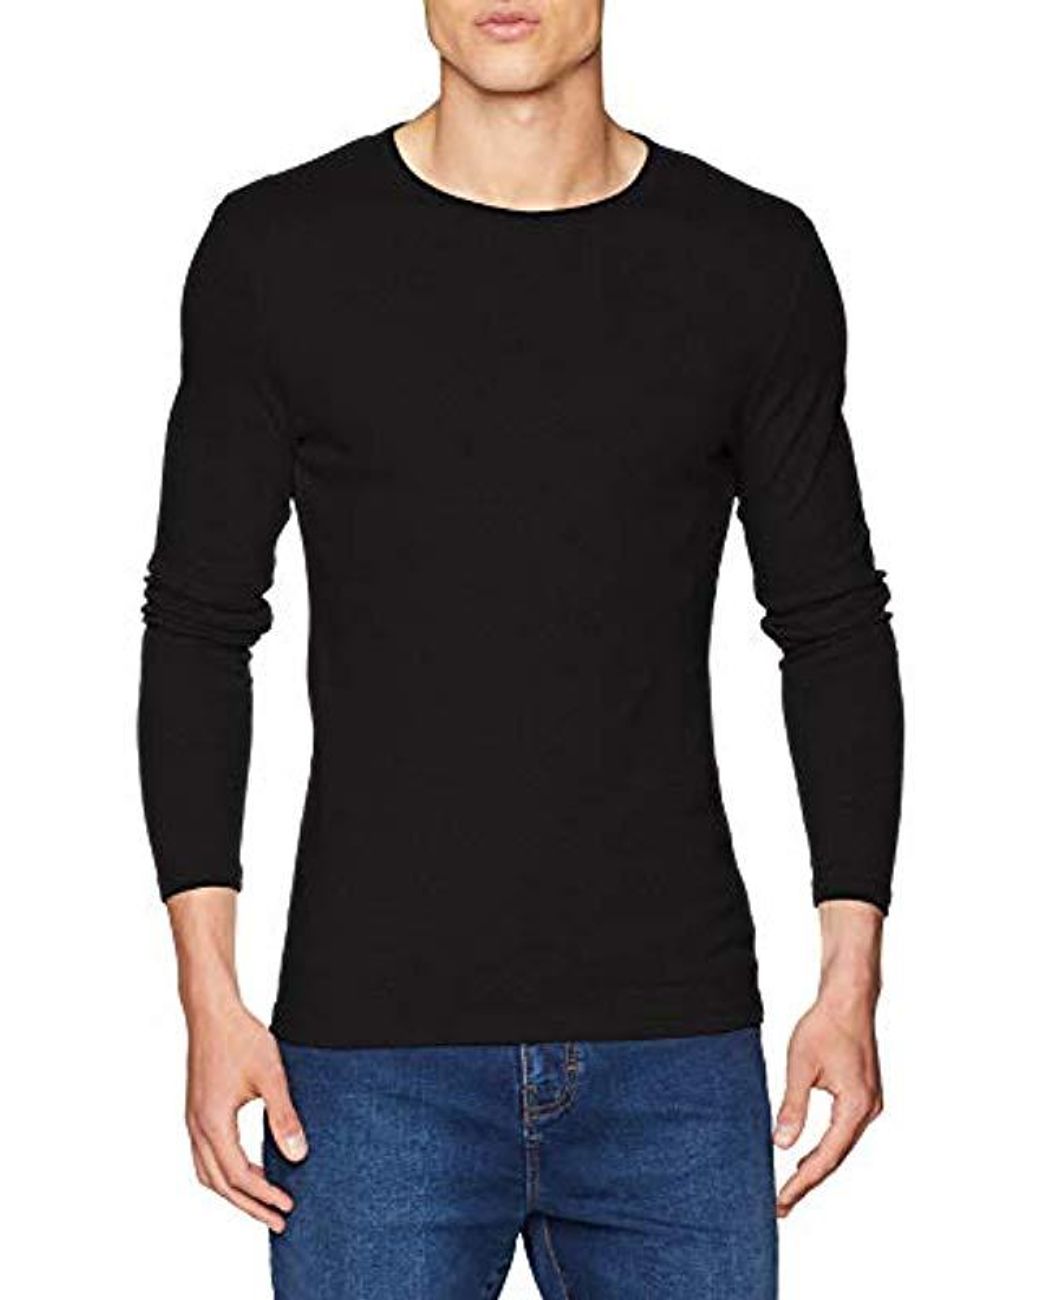 G-Star RAW Base Round Neck Tee Long Sleeve 1-pack in Black for Men - Lyst